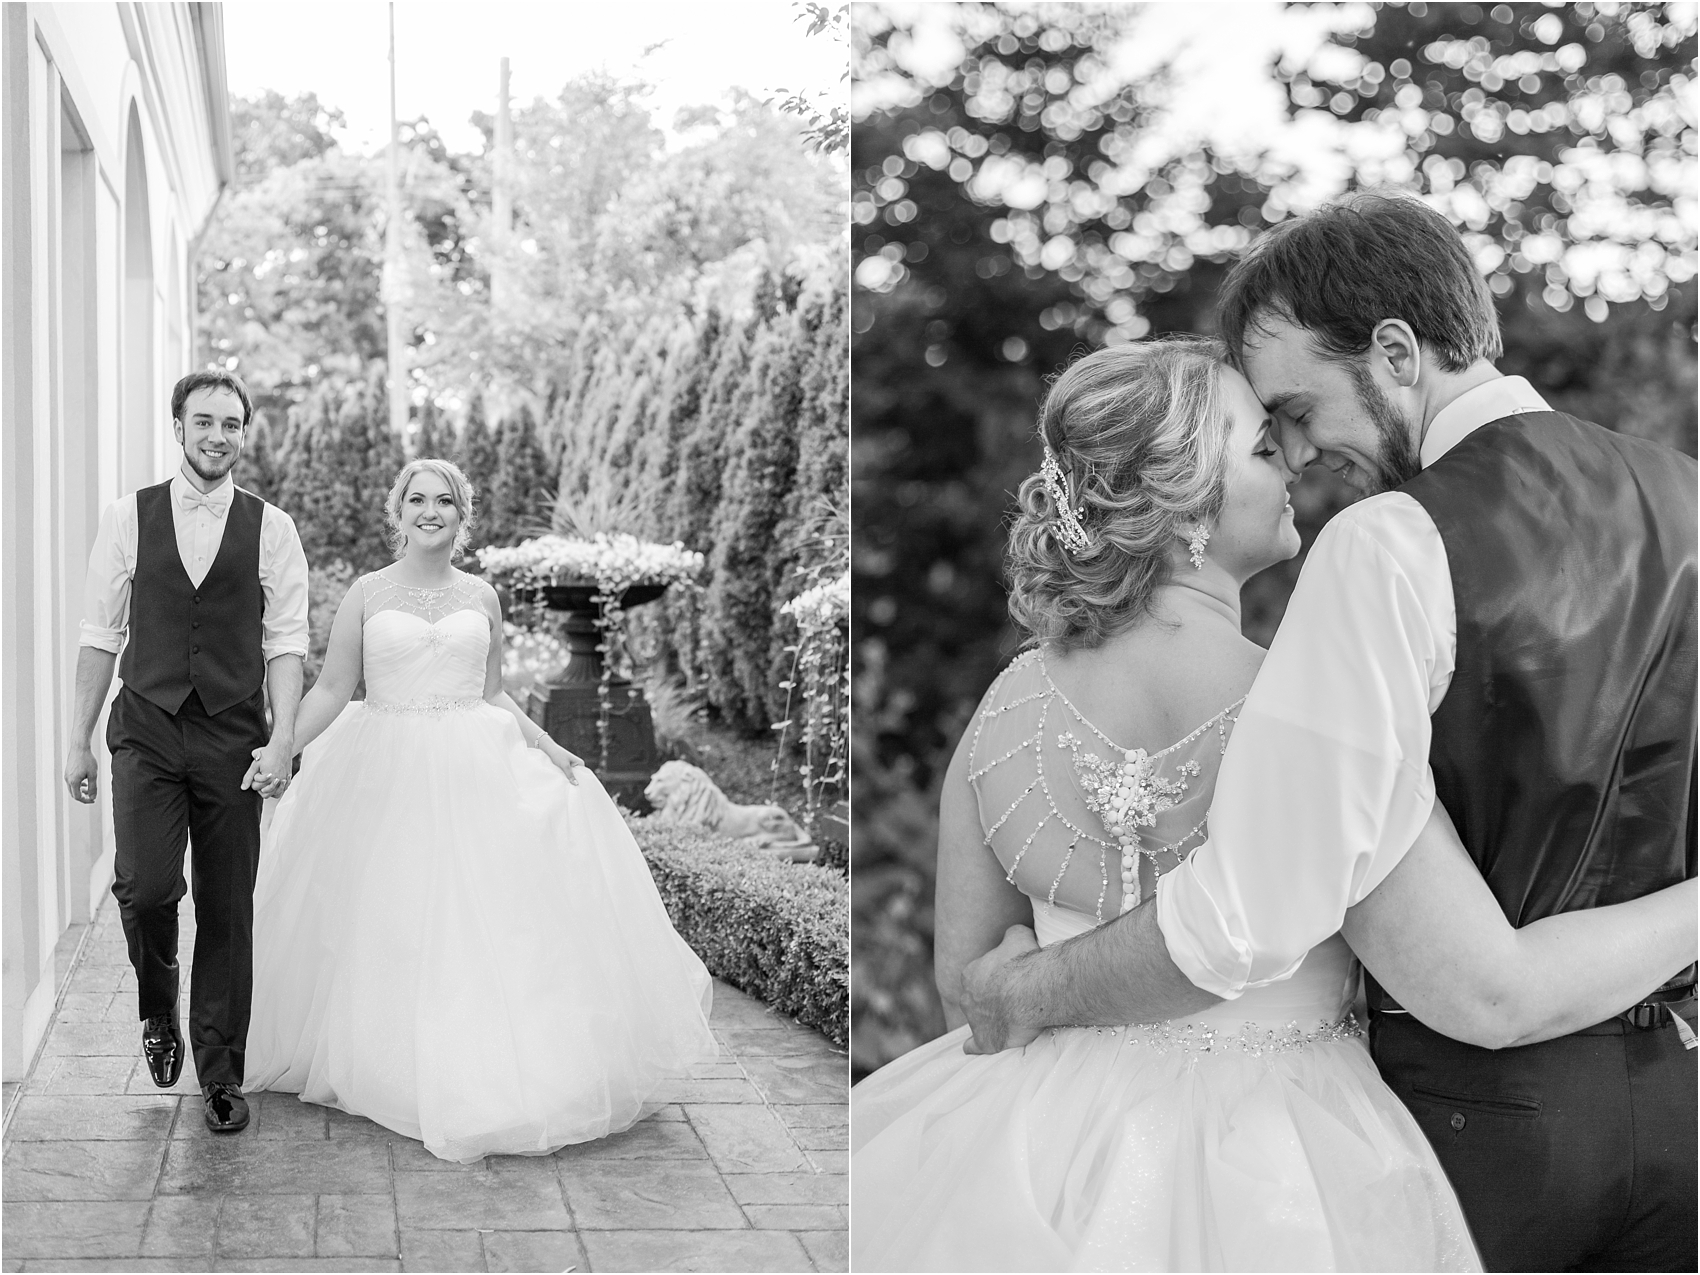 lord-of-the-rings-inspired-wedding-photos-at-crystal-gardens-in-howell-mi-by-courtney-carolyn-photography_0095.jpg